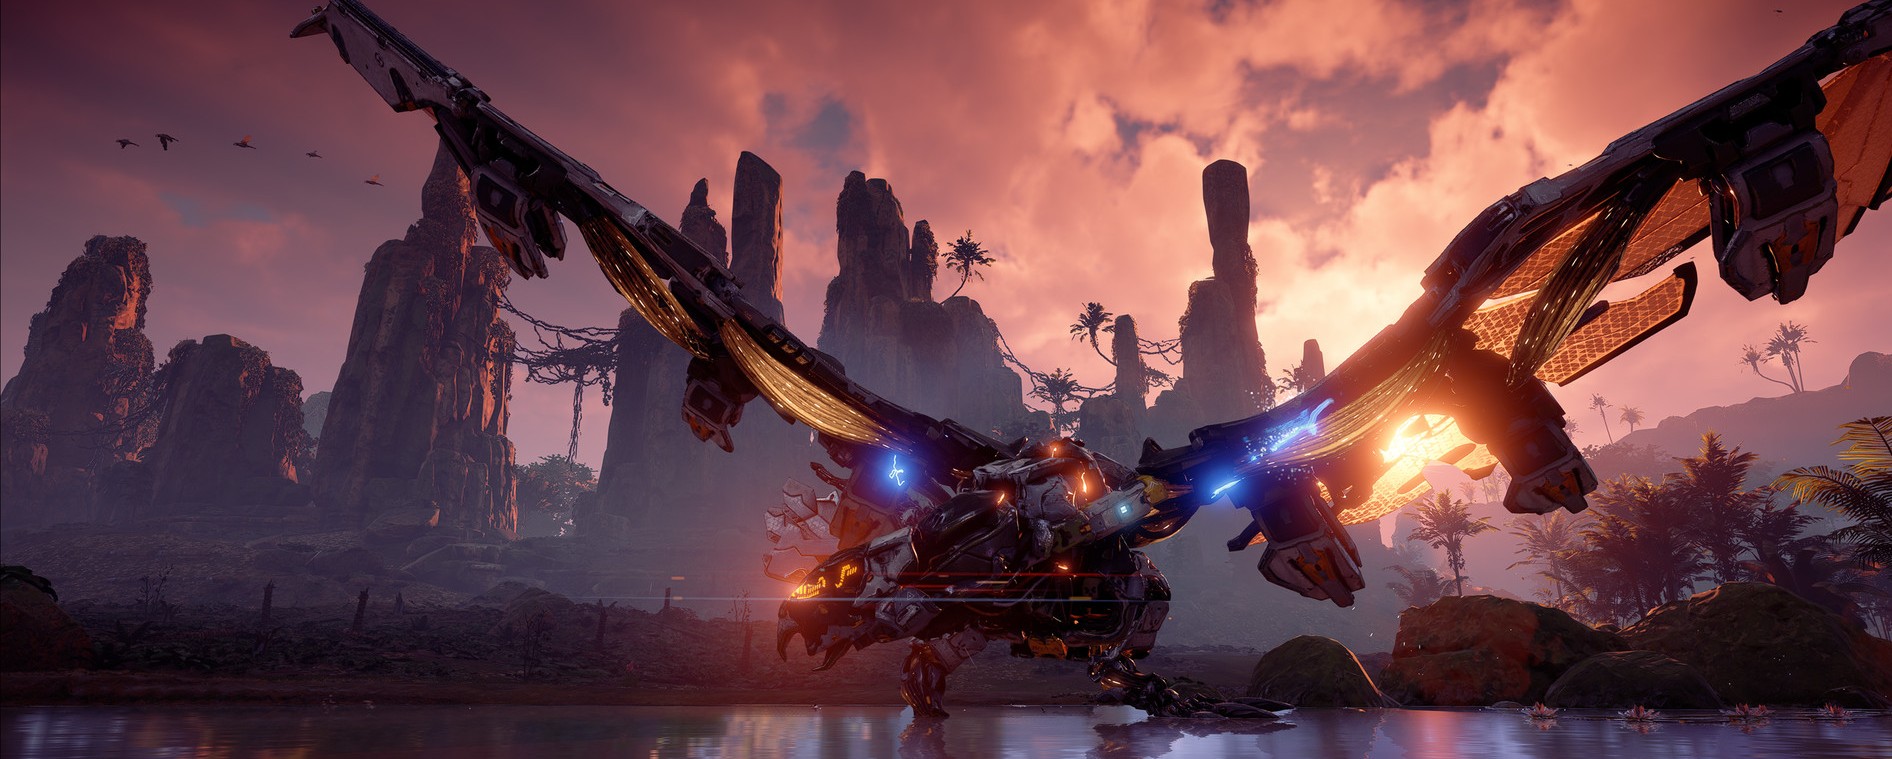 Horizon Zero Dawn Complete Edition arrives on Steam in August: here's